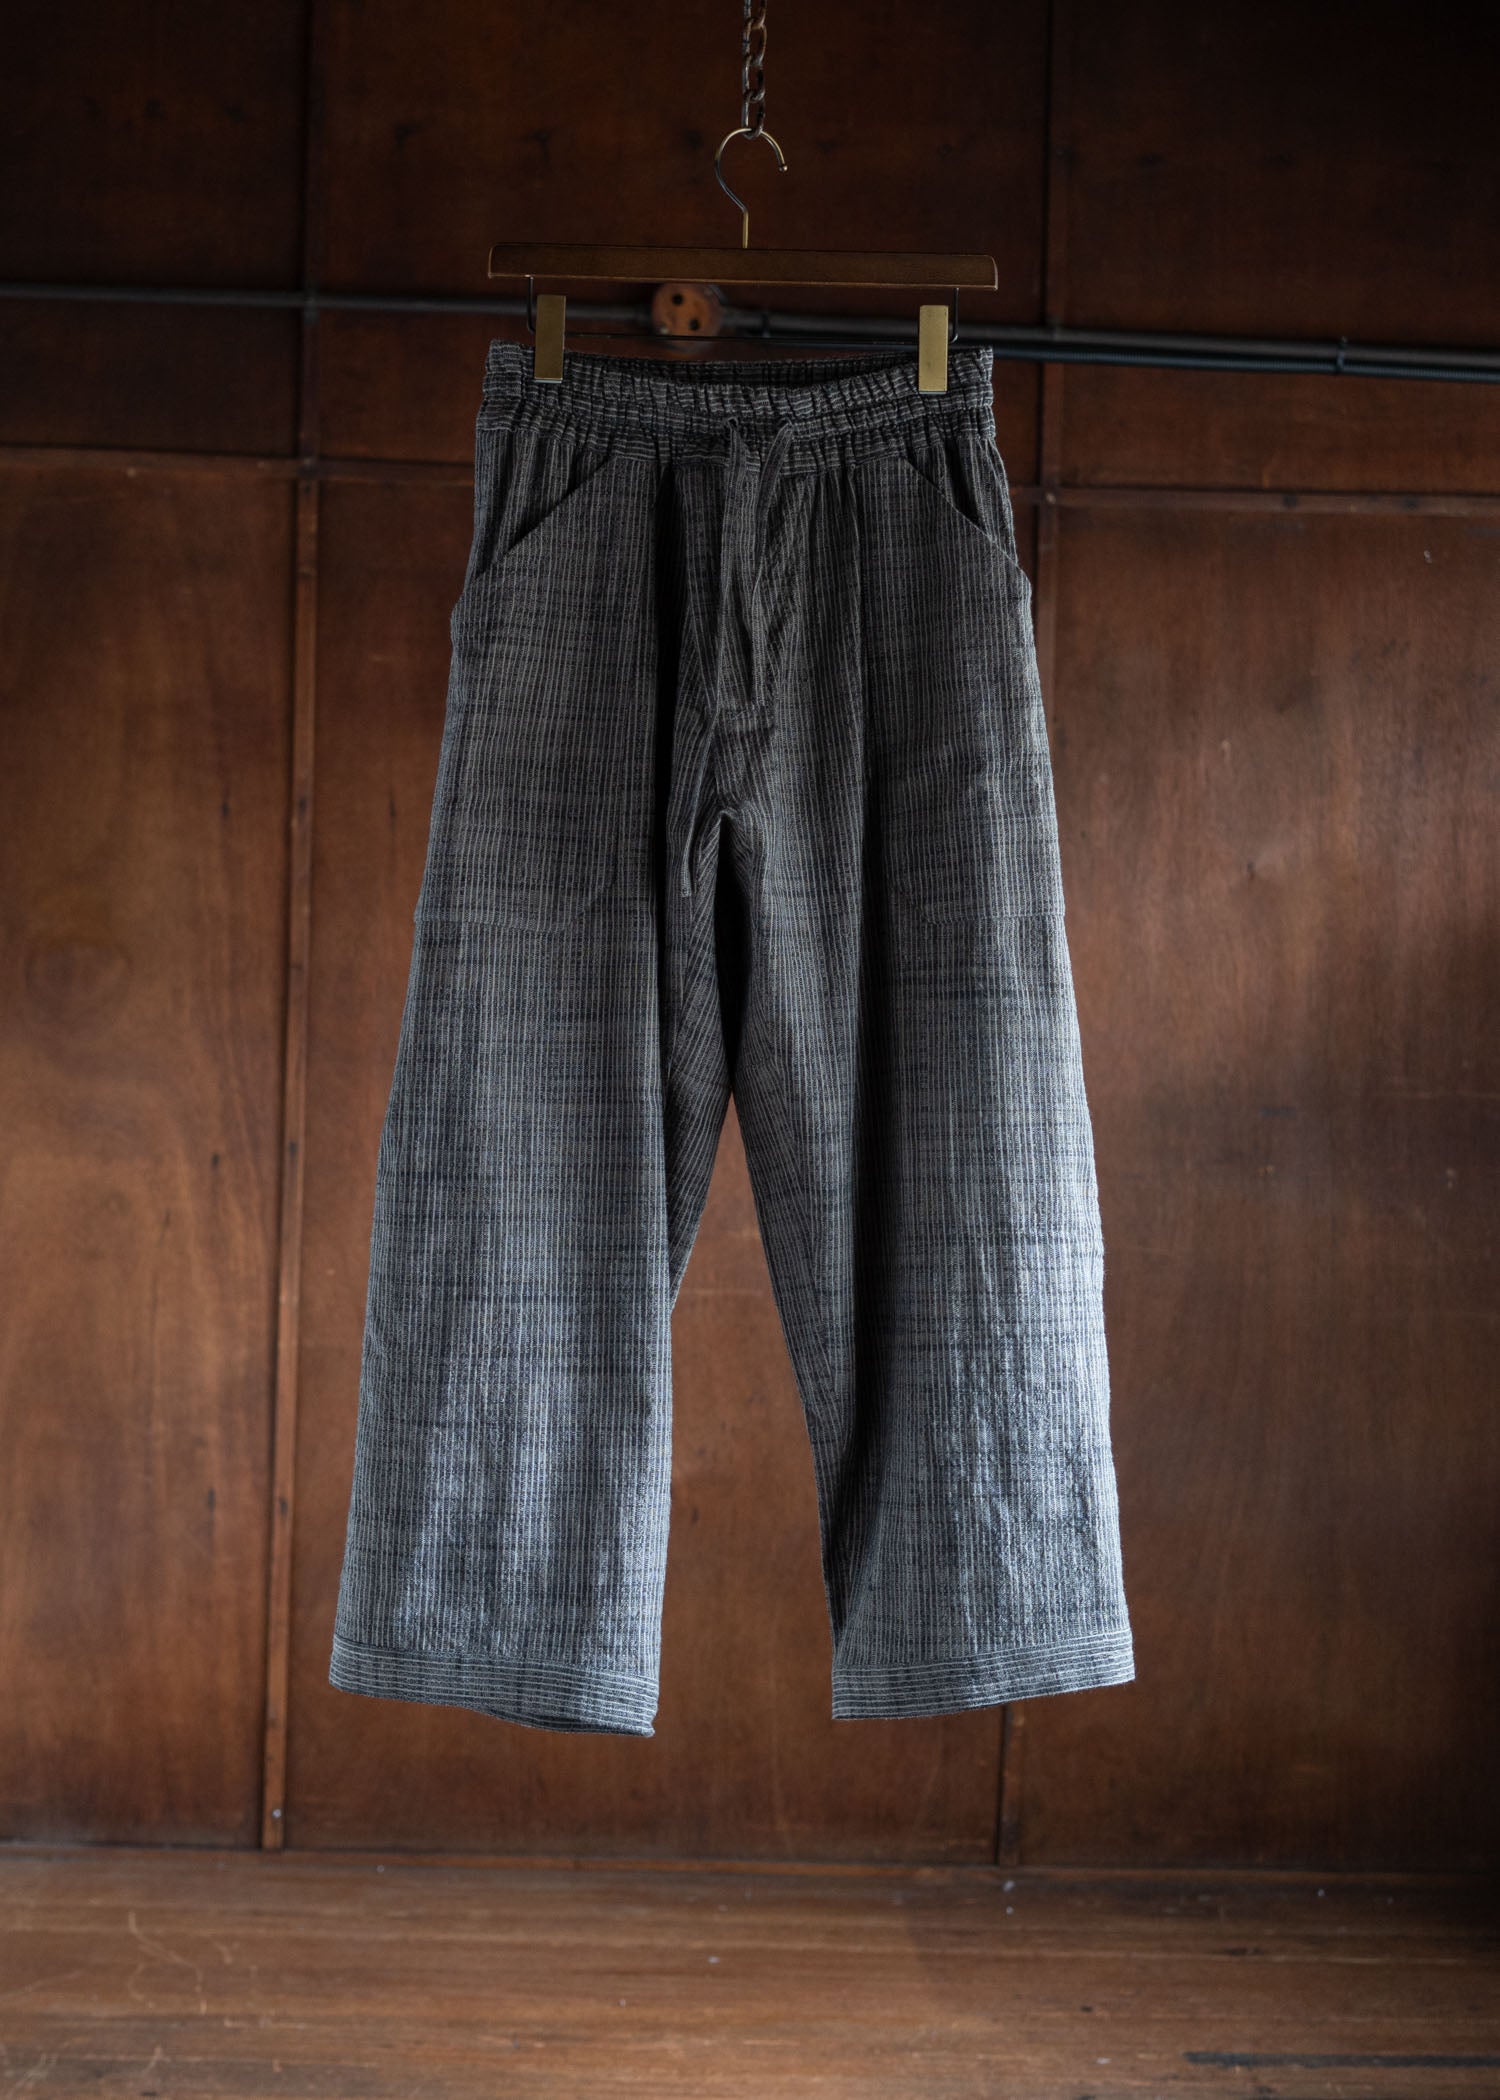 JAN-JAN VAN ESSCHE TROUSERS#80 LOOSE FIT LOW CROTCH TROUSERS WITH ELASTIC WAISTBAND COTTON CLOTH VINTAGE STRIPED